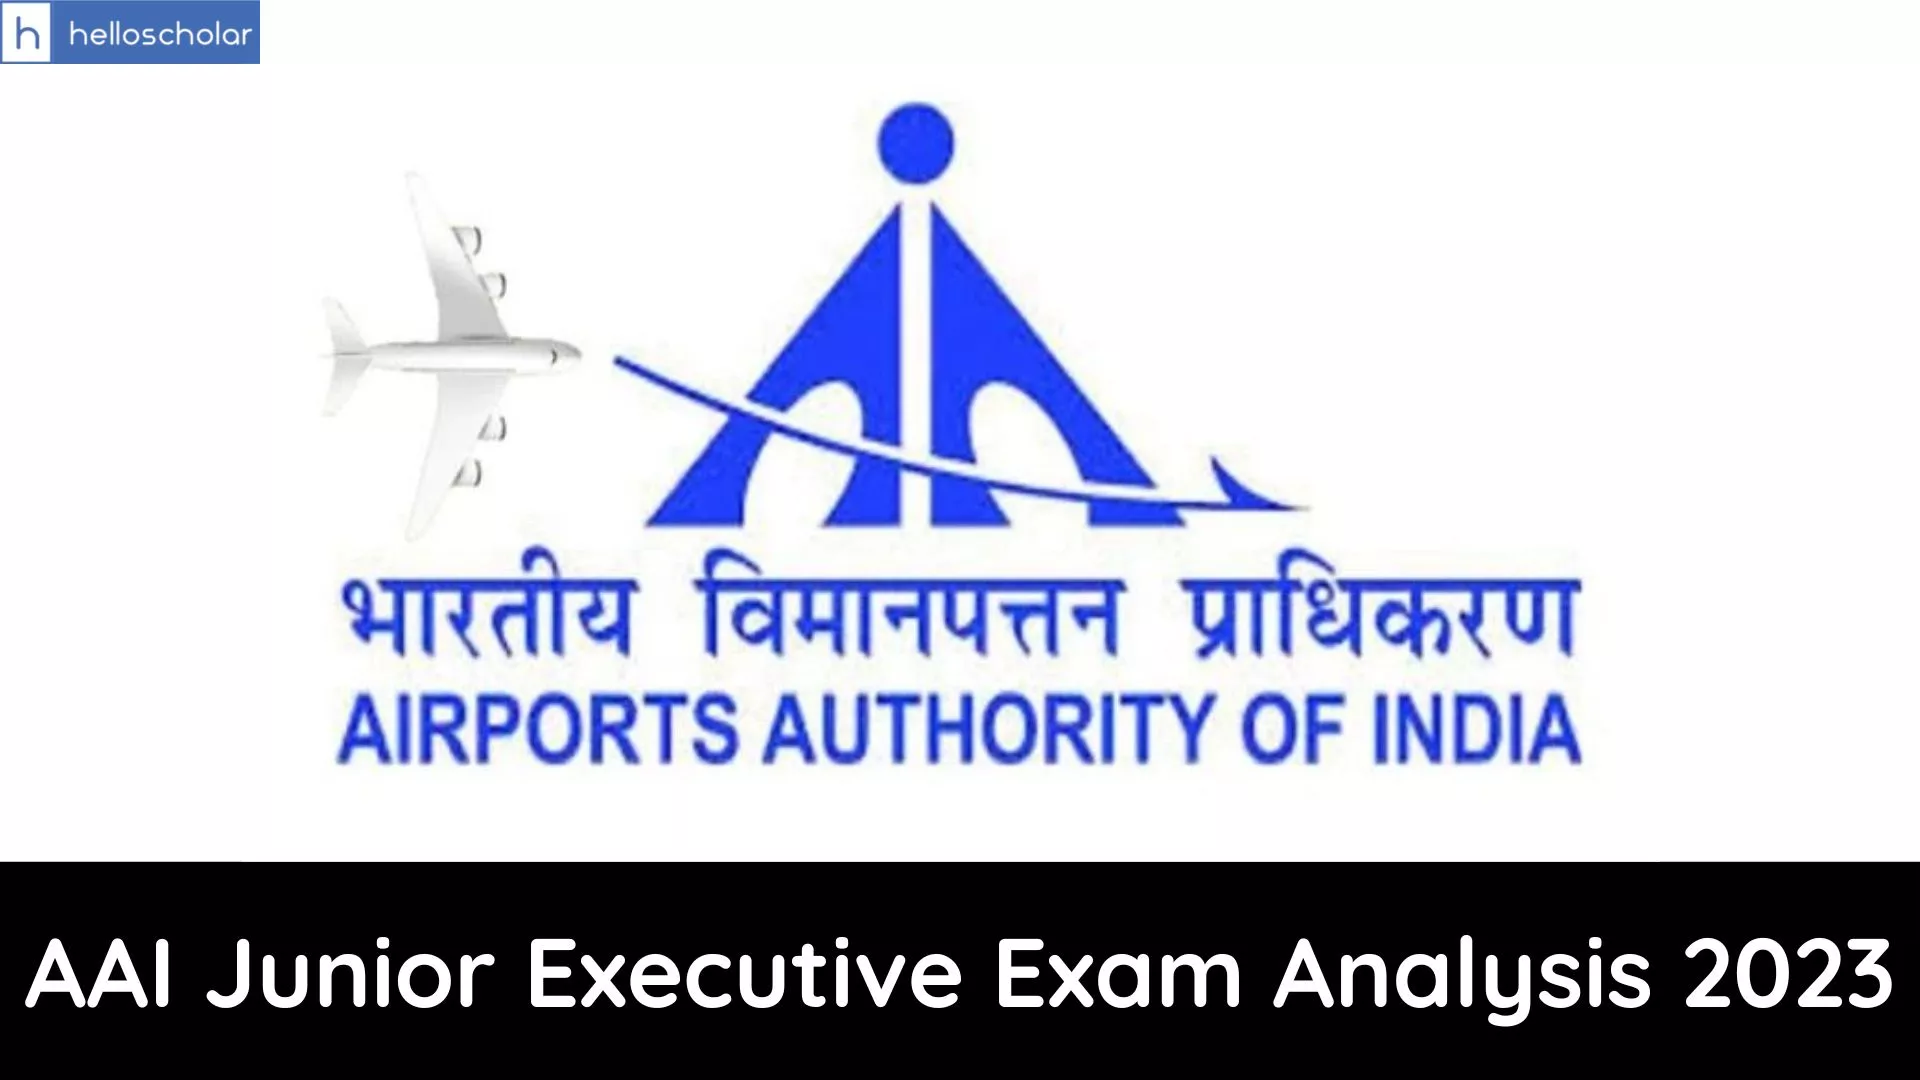 AAI Junior Executive Exam Analysis 2023 and Memory Based Questions